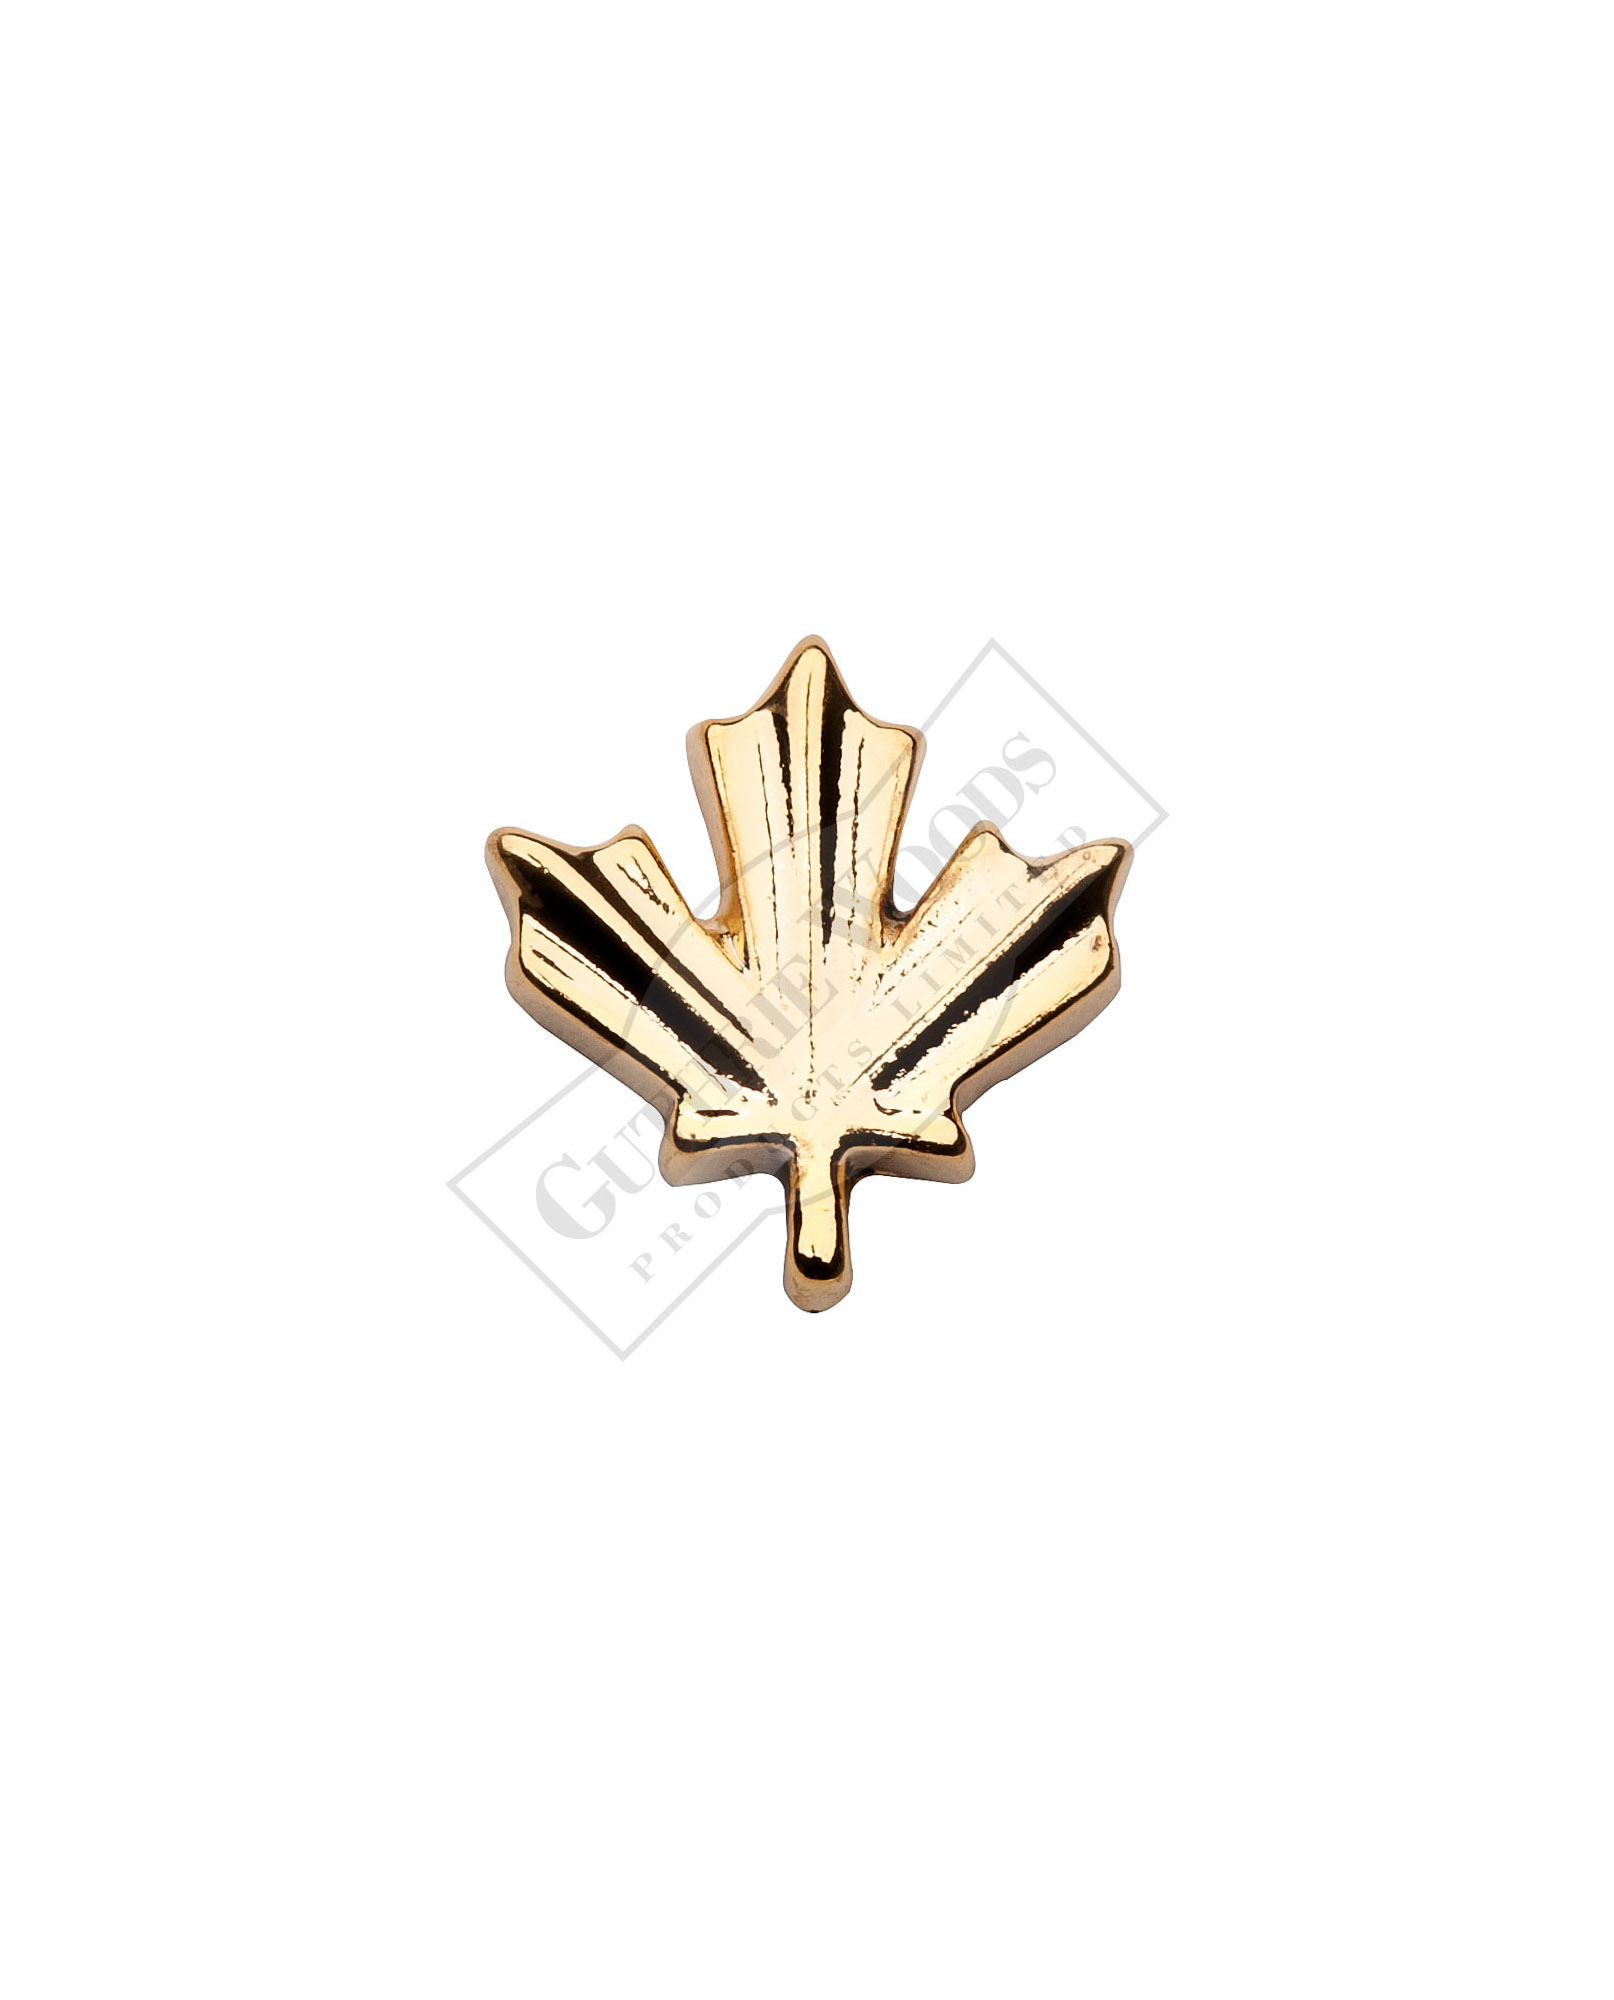 Gold Maple Leaf - Undress Ribbon Devices #247-G